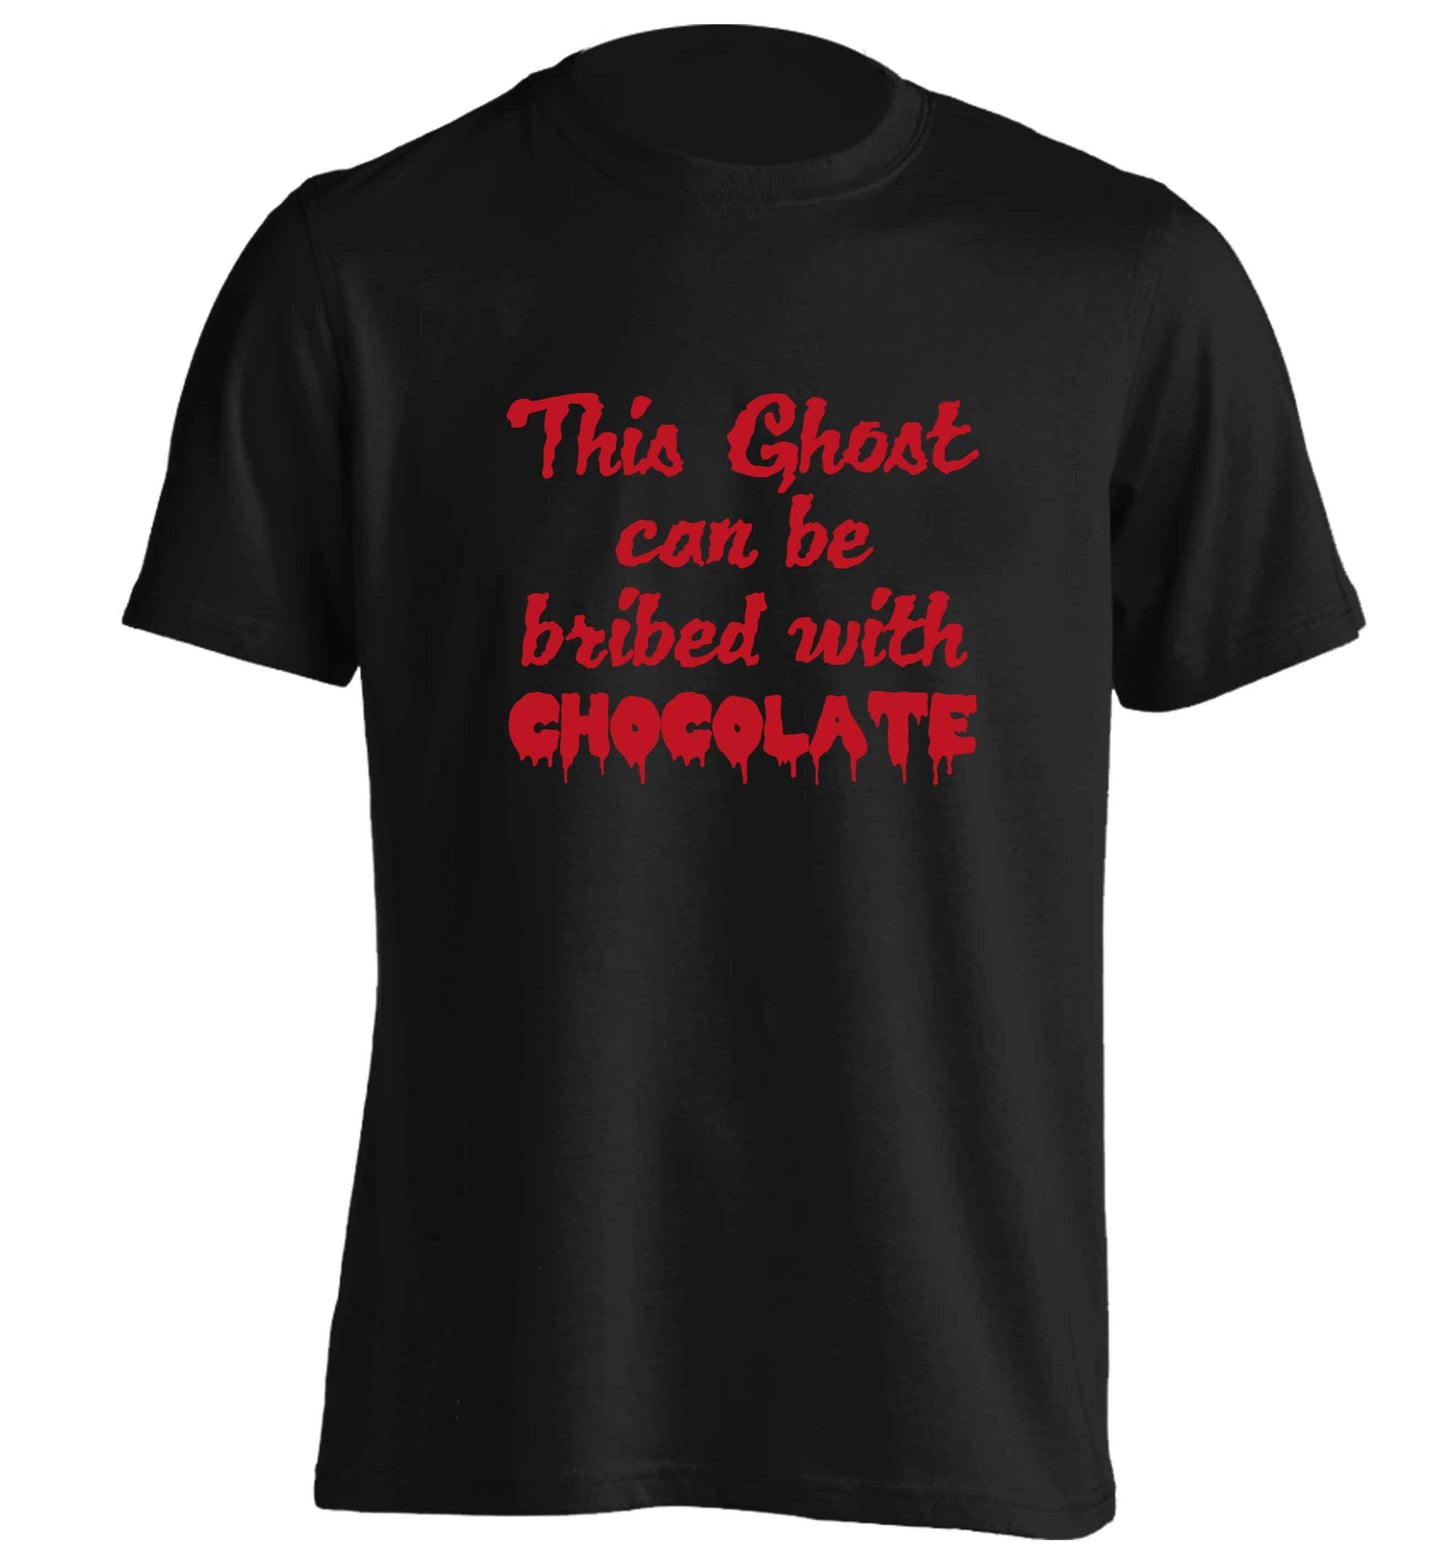 This ghost can be bribed with chocolate adults unisex black Tshirt 2XL